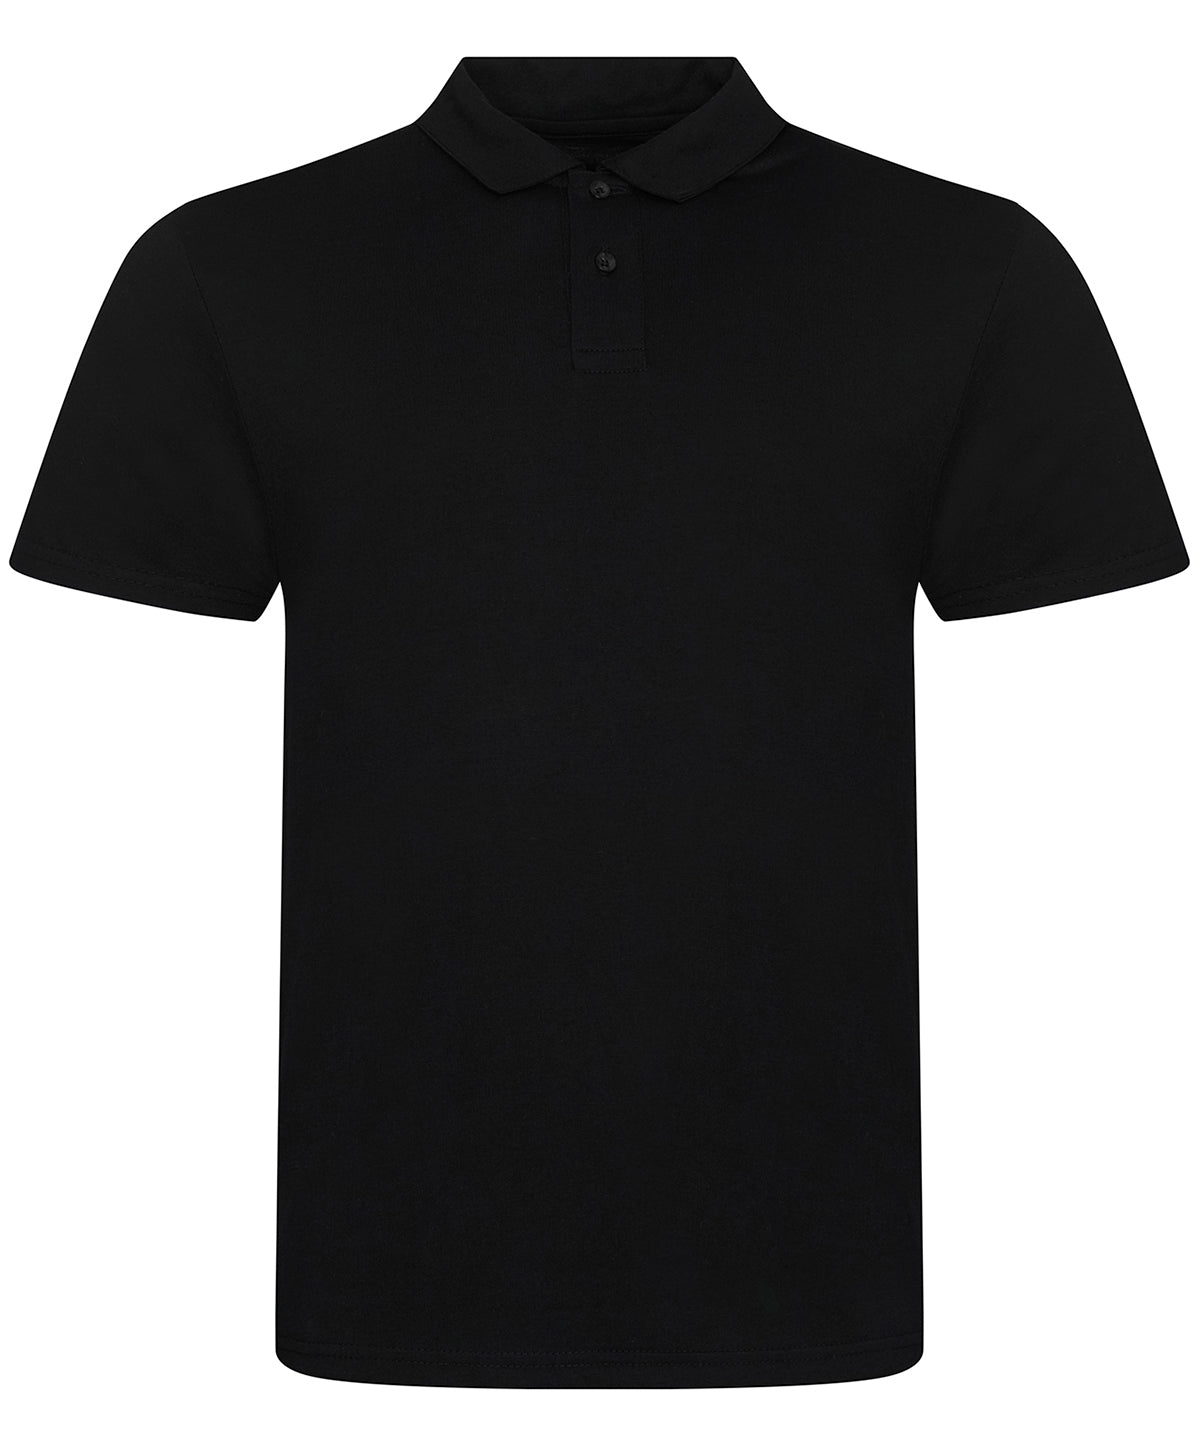 Personalised Polo Shirts - Dark Grey AWDis Just Polo's Triblend polo